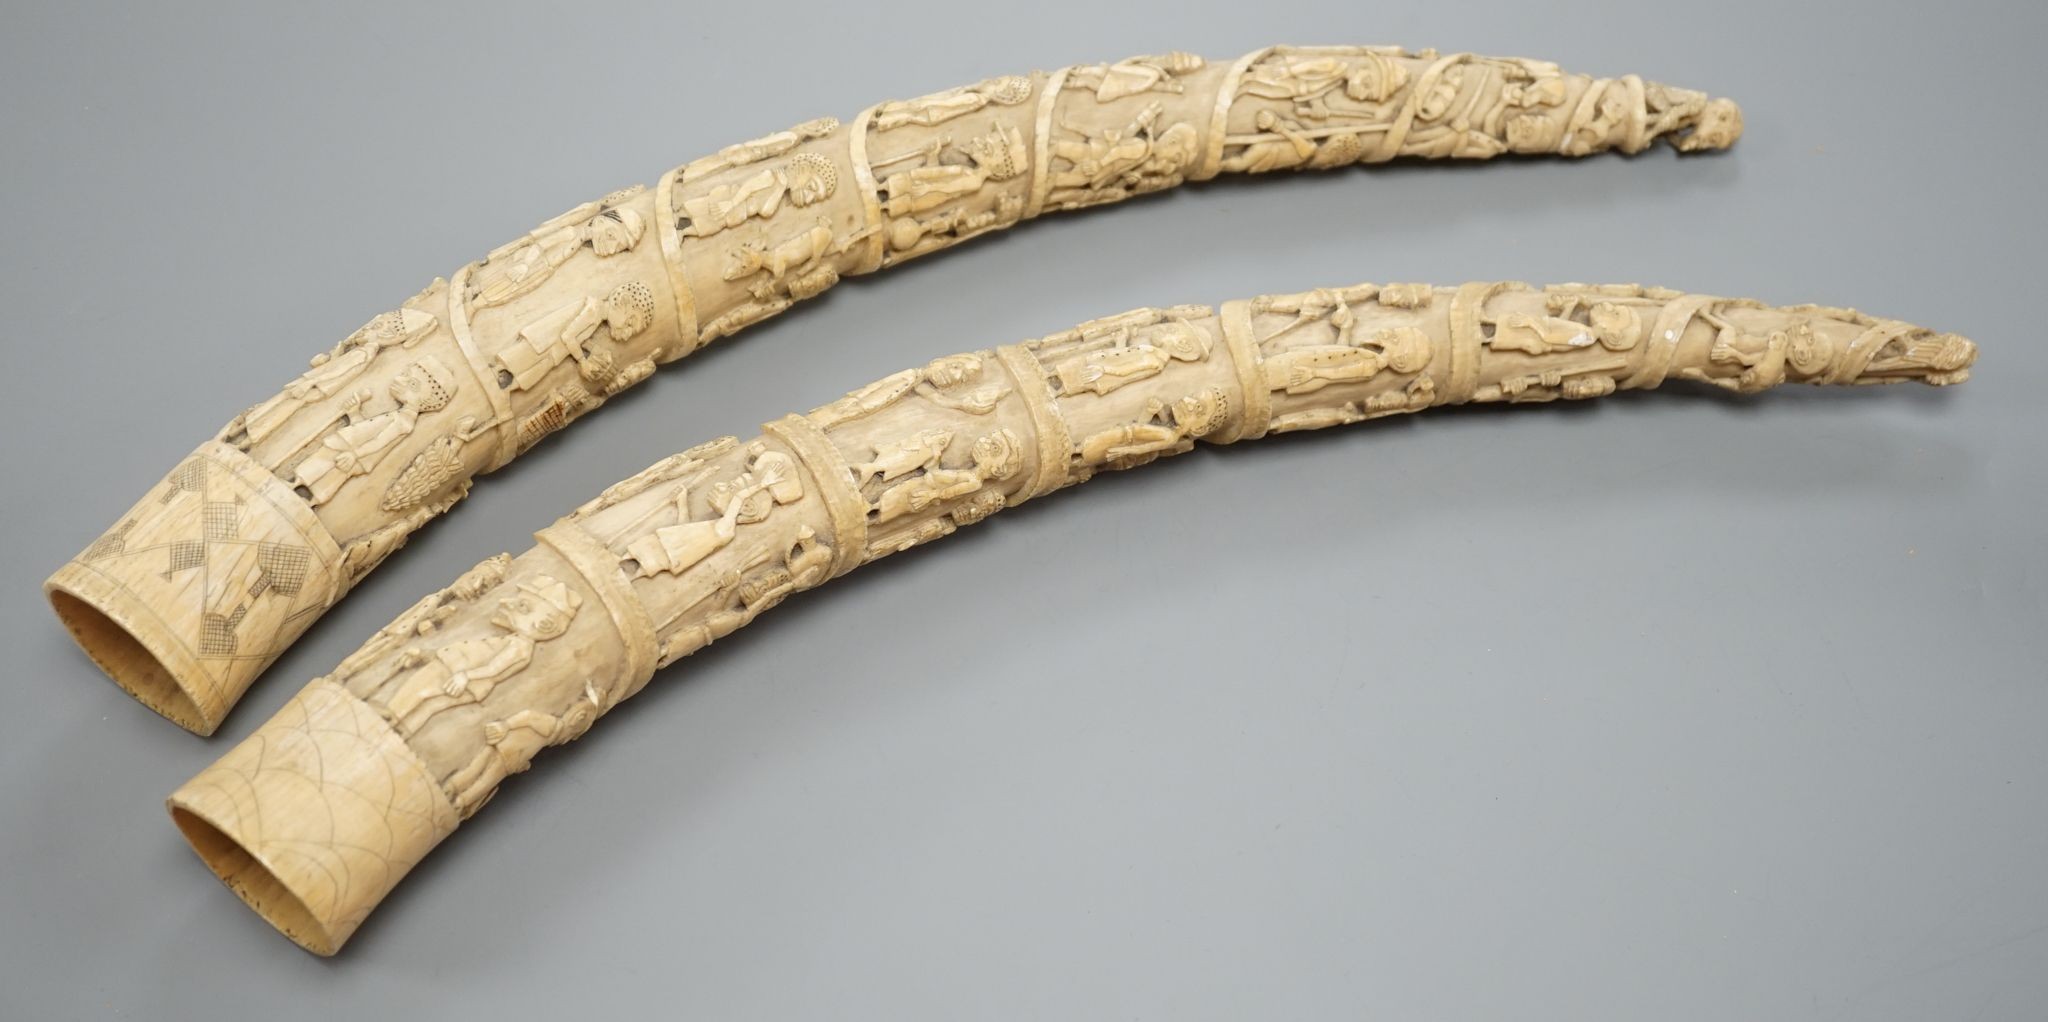 Two Loango carved ivory tusks, Republic of Congo, mid to late 19th century, 46cms long.